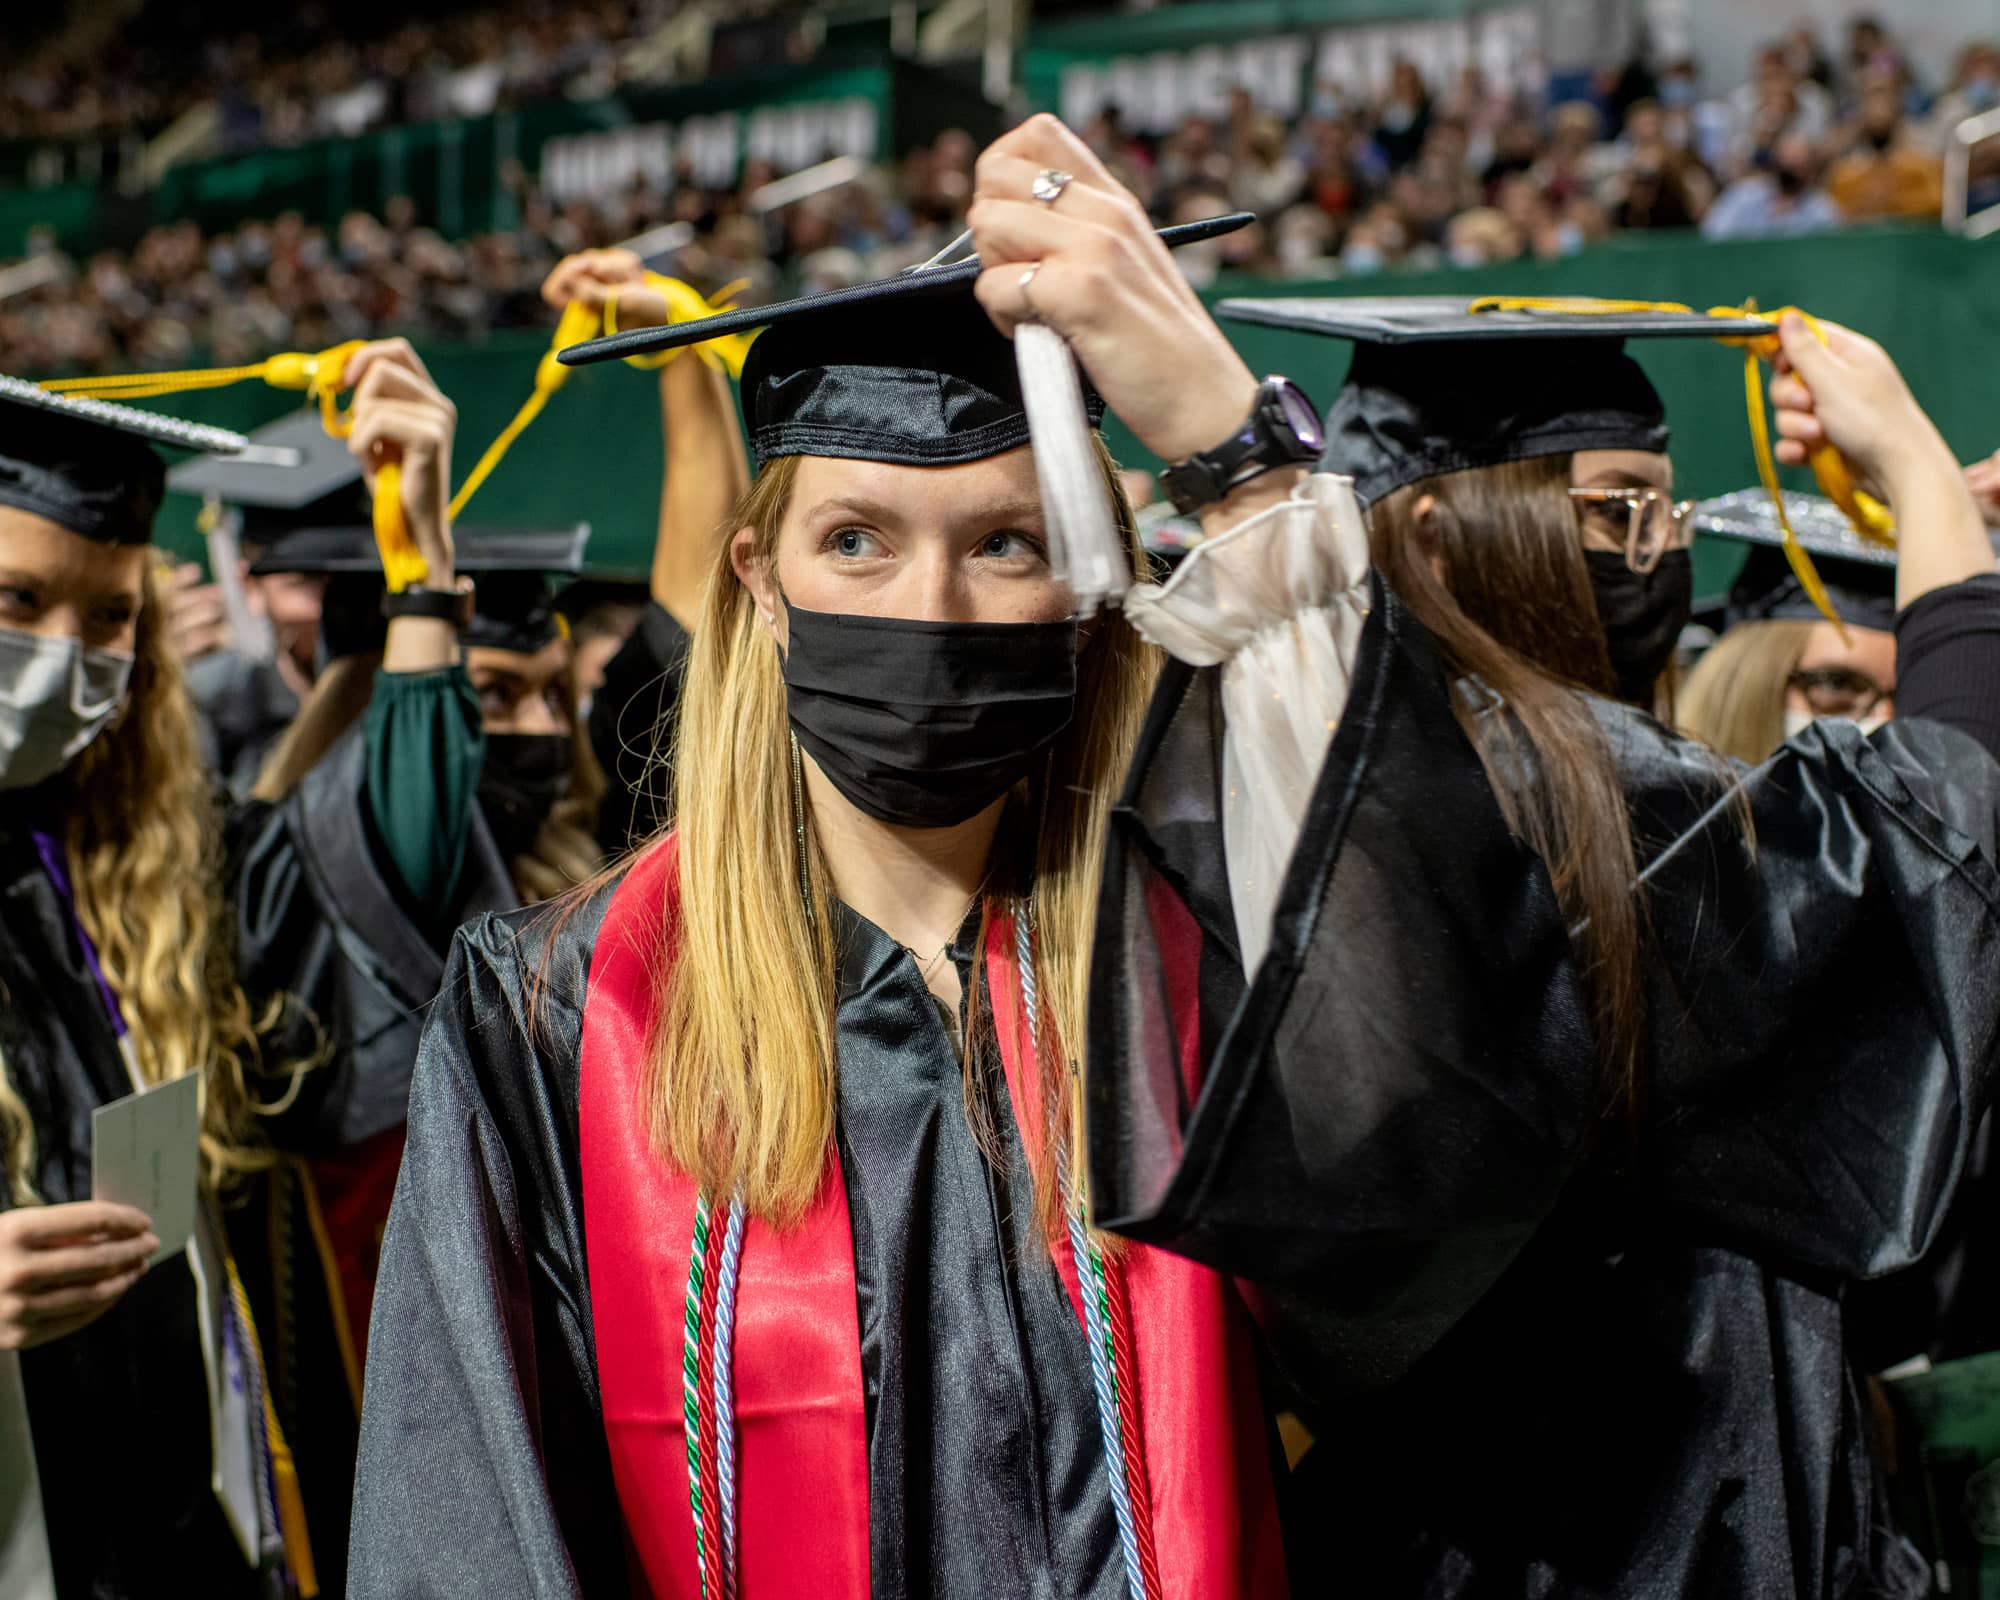 Undergraduate students move their tassels from the right to the left to signify they have officially graduated during the Fall Commencement 2021 at the Athens Campus.